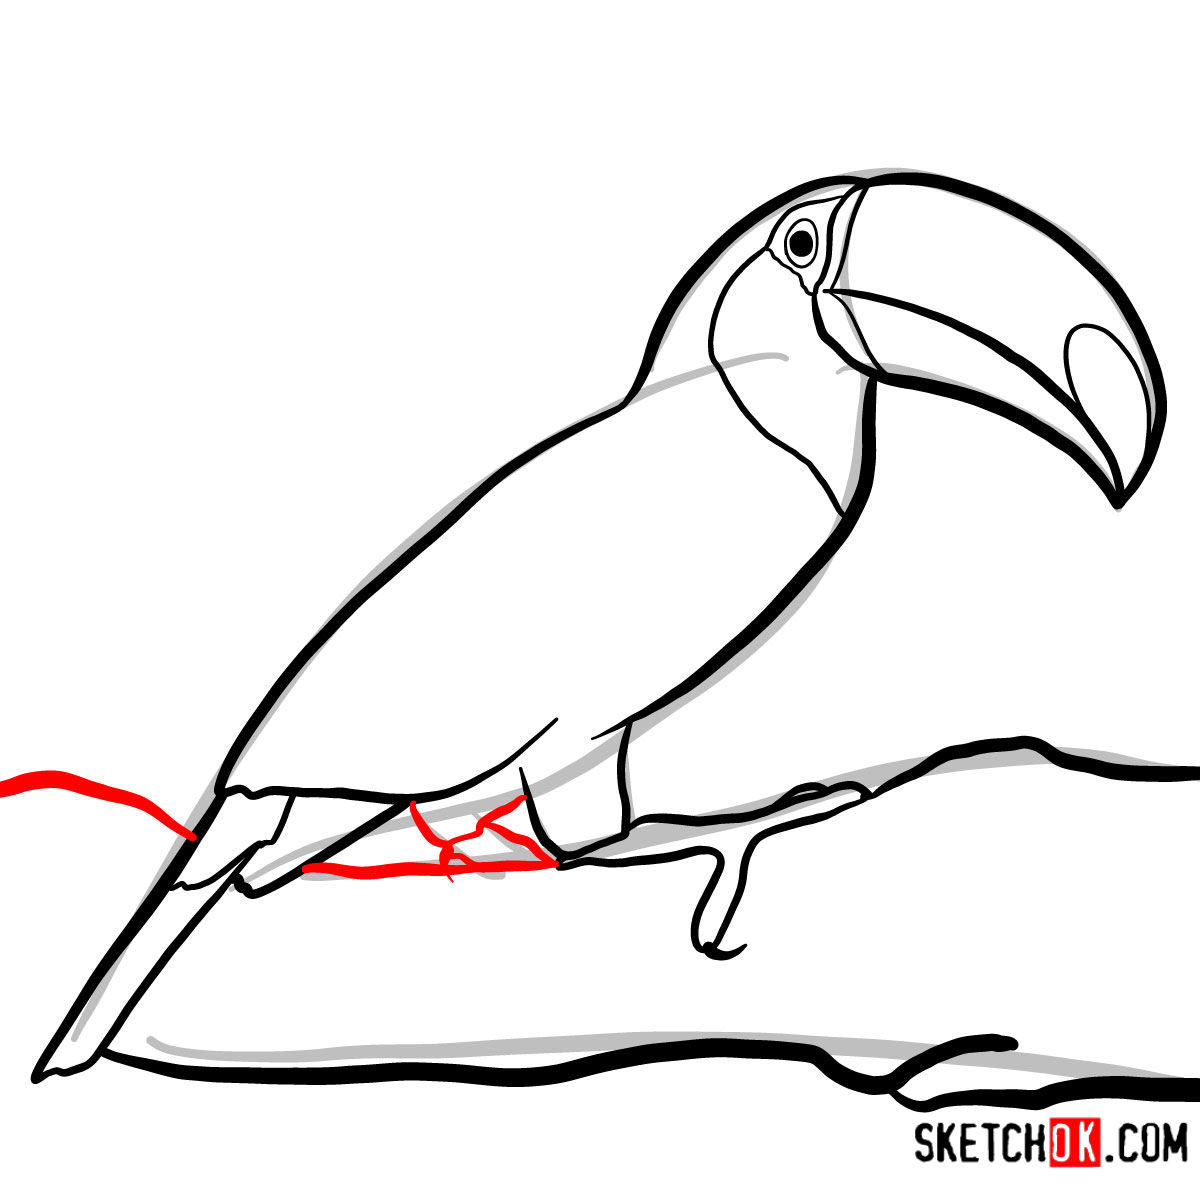 How to draw a Toucan Birds Sketchok easy drawing guides